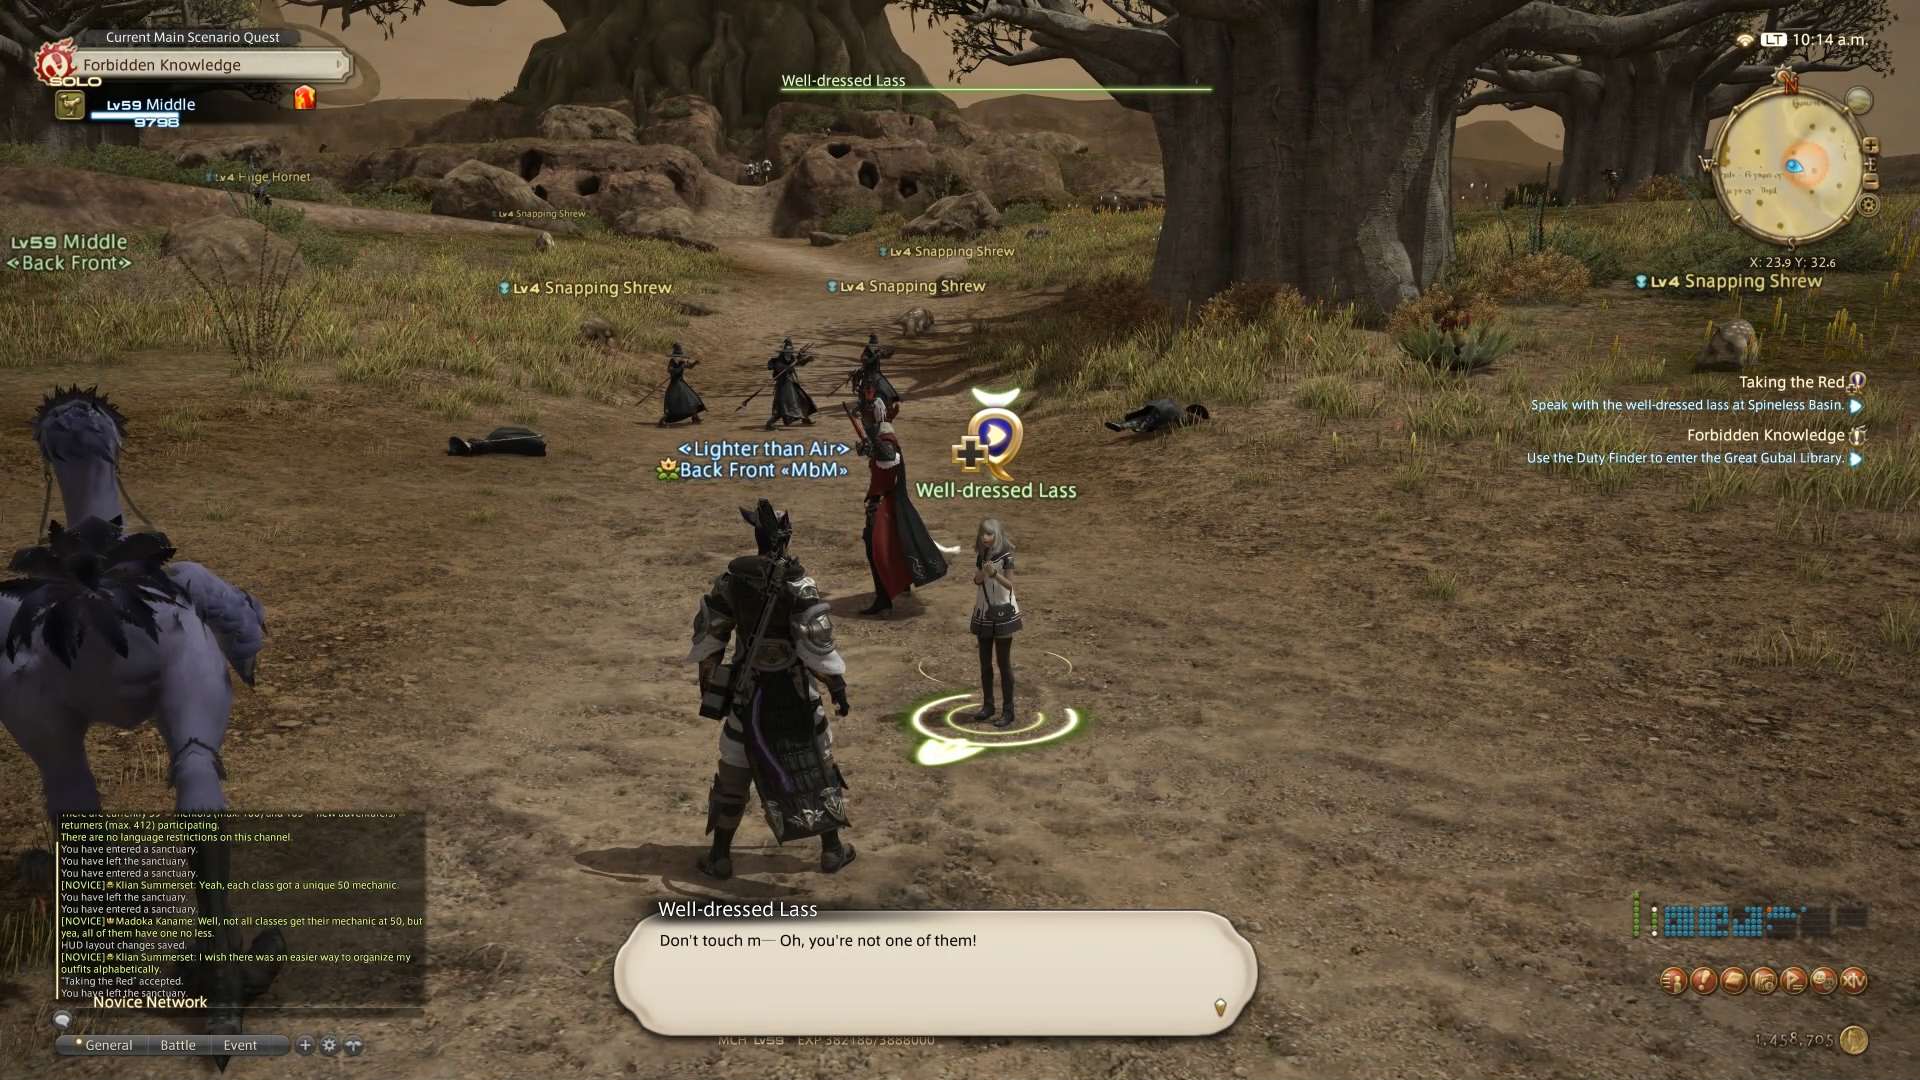 How To Unlock Red Mage And Samurai Jobs In Final Fantasy 14